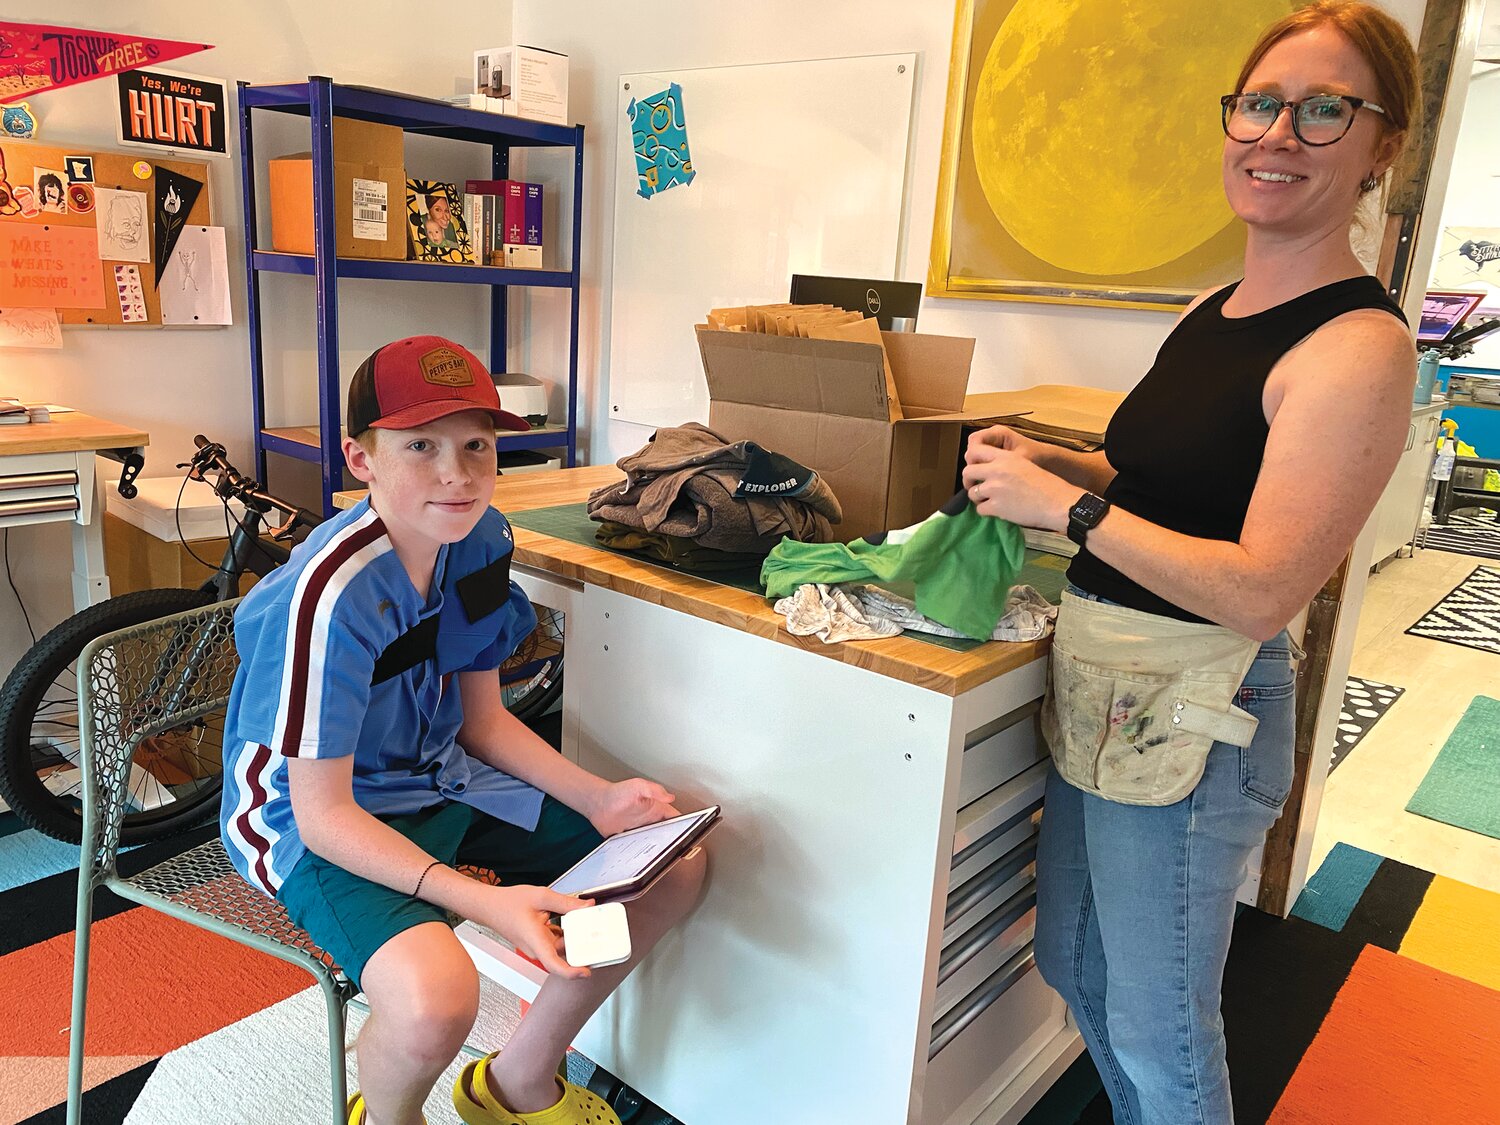 Ari Edgeton, age 12, assists his mom, Gillian McLaughlin, at Bitter Buffalo (4557 S 34th Ave.) on Aug. 6. People could do their own screen printing on t-shirts and flags during the event. McLaughlin's business moved from northeast Minneapolis into the Nokomis area about a year ago.